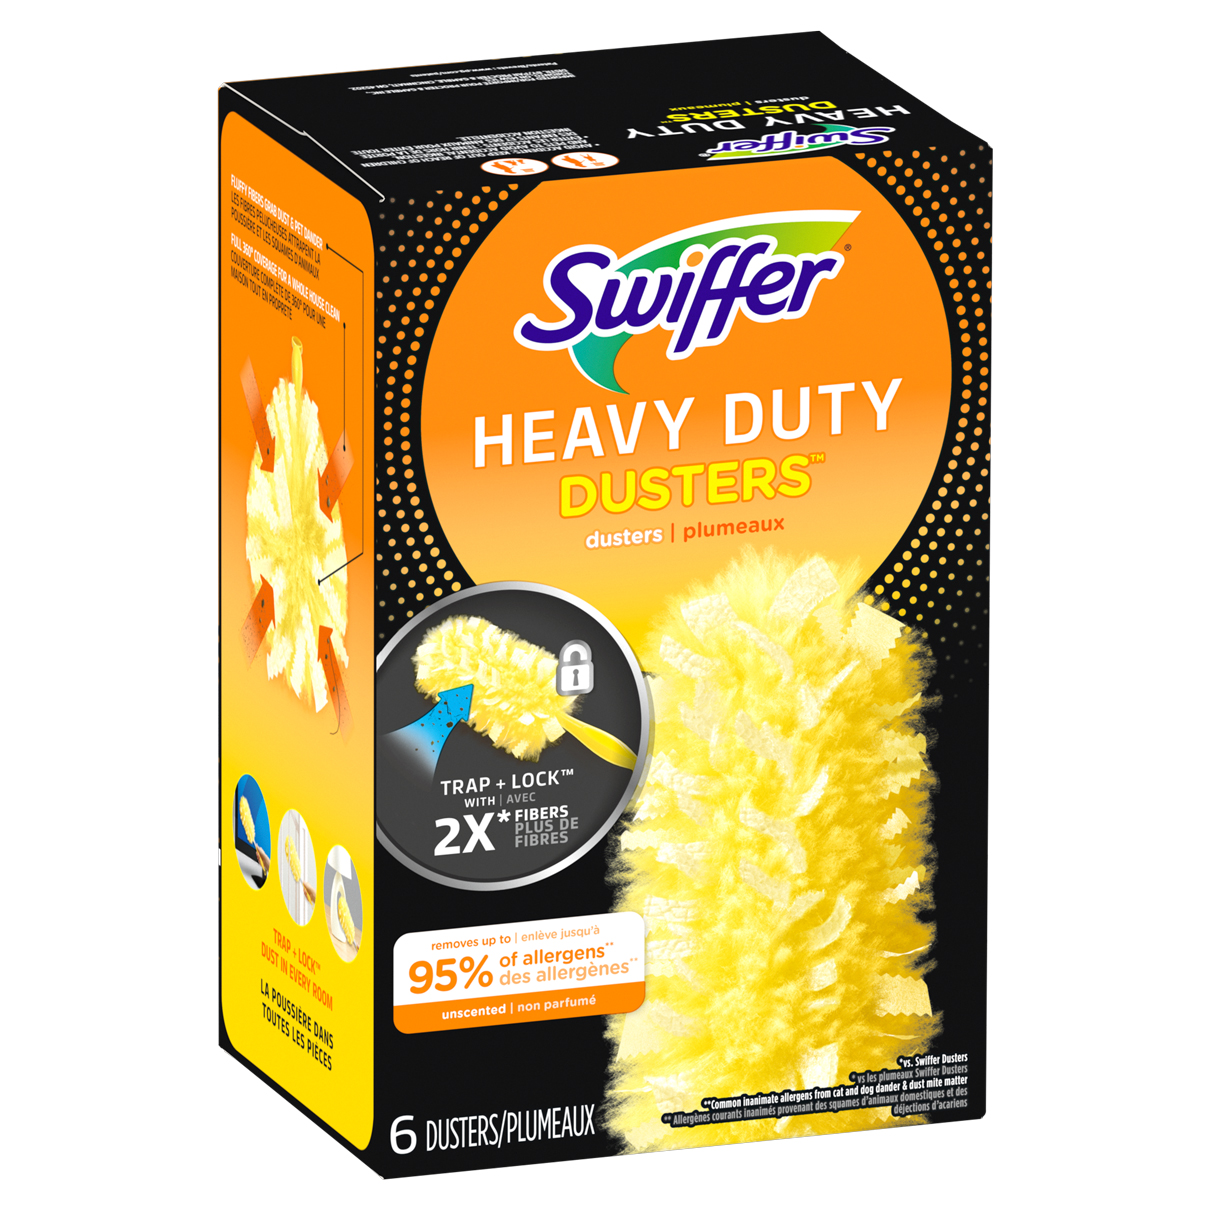 feather duster Swiffer dustmagnet XXL starterkit incl. handle and 2 cloths  - Cleaning Systems & Accessories